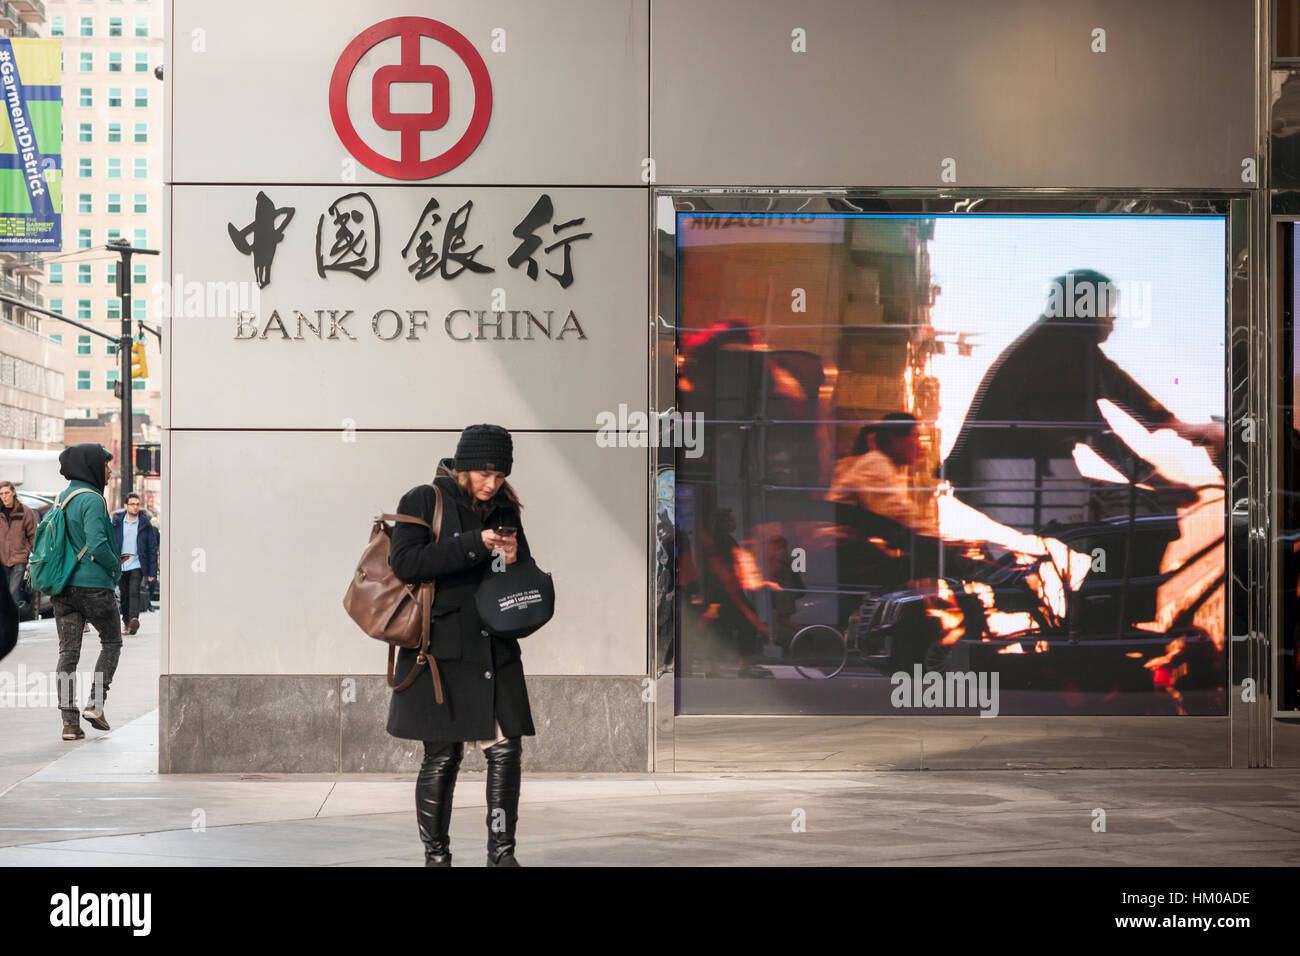 The New York headquarters of the Bank of China on Sixth Avenue on Thursday, January 26, 2017. The fourth largest bank in the world by assets, the bank had its headquarters in an unassuming building on Madison Avenue for 35 years. The state owned bank recently moved to its new gleaming 28-story building on Sixth Avenue where it occupies over half of the real estate.  (© Richard B. Levine) Stock Photo